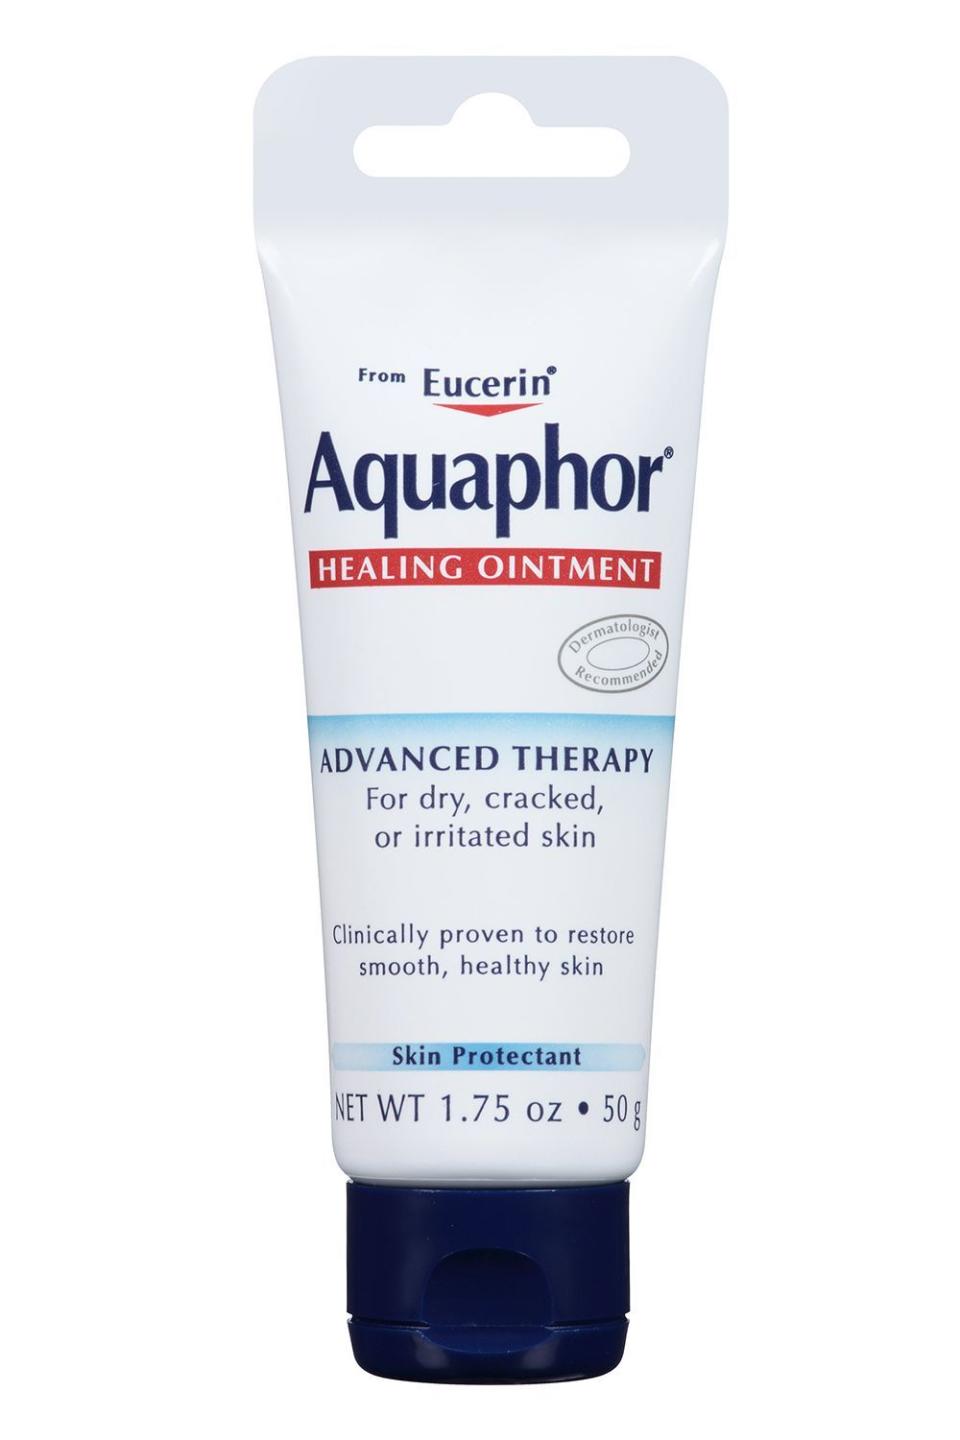 14) Aquaphor Advanced Therapy Healing Ointment